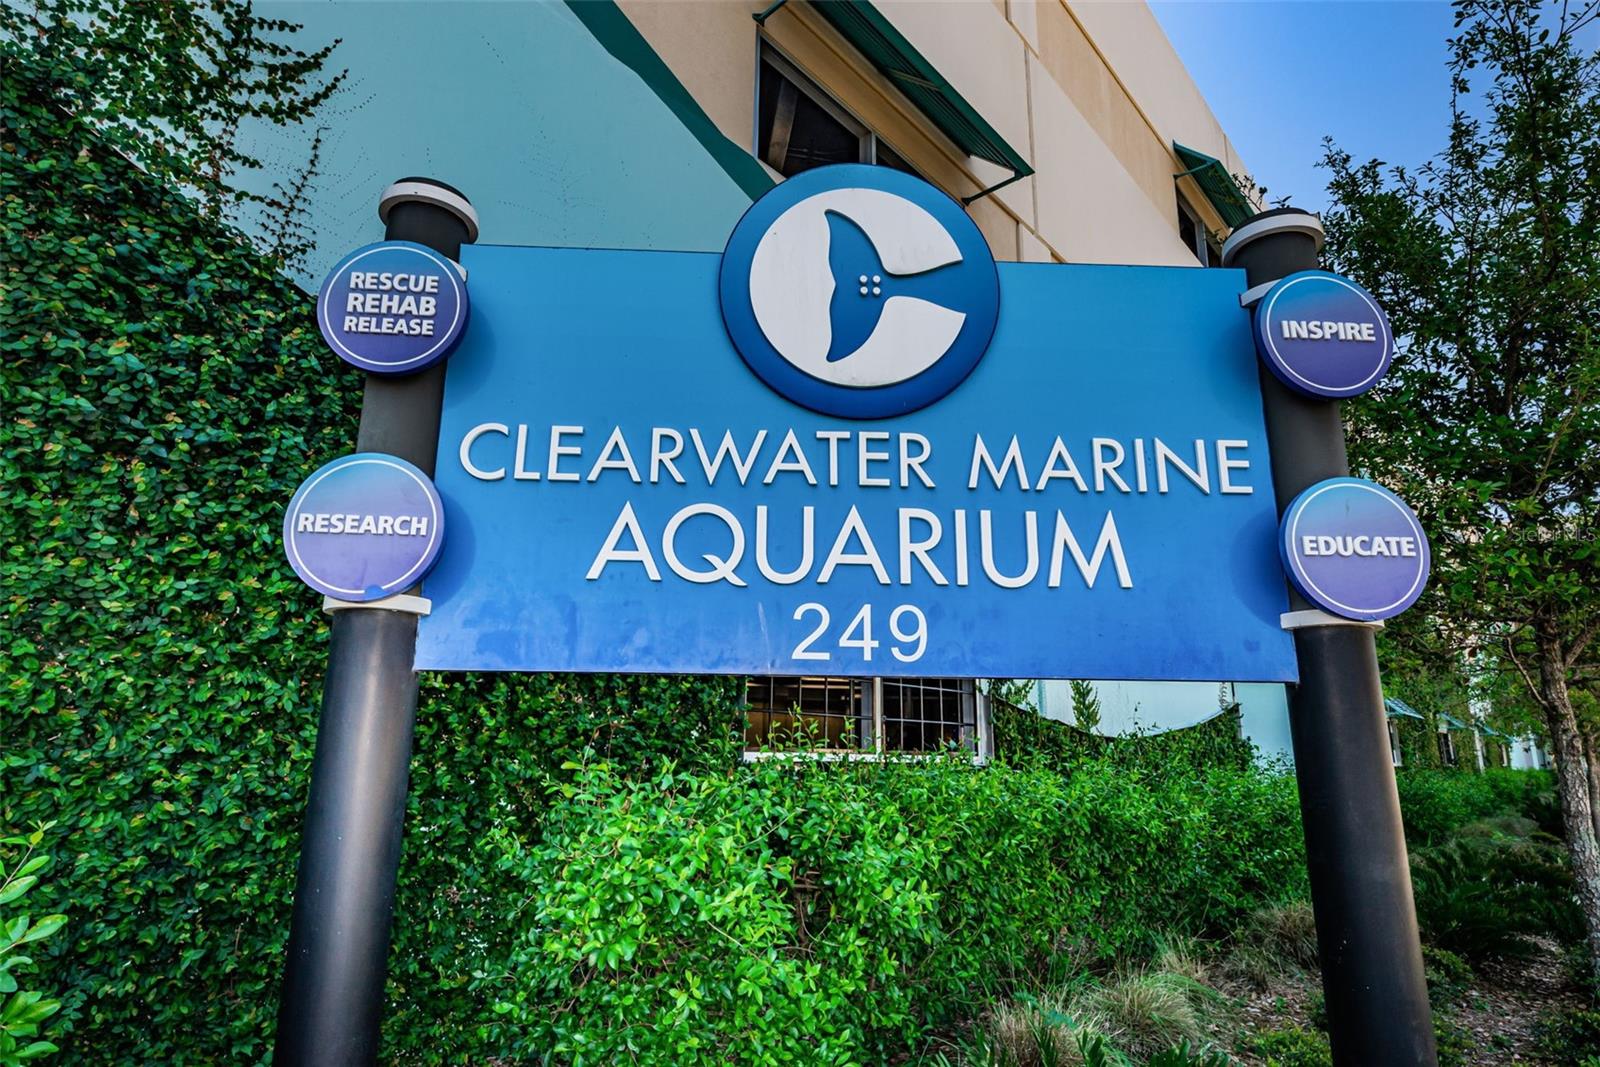 The captivating Clearwater Marine Aquarium, a nearby treasure for marine enthusiasts and nature lovers alike! This renowned aquarium is a haven for marine life rehabilitation, education, and conservation. I